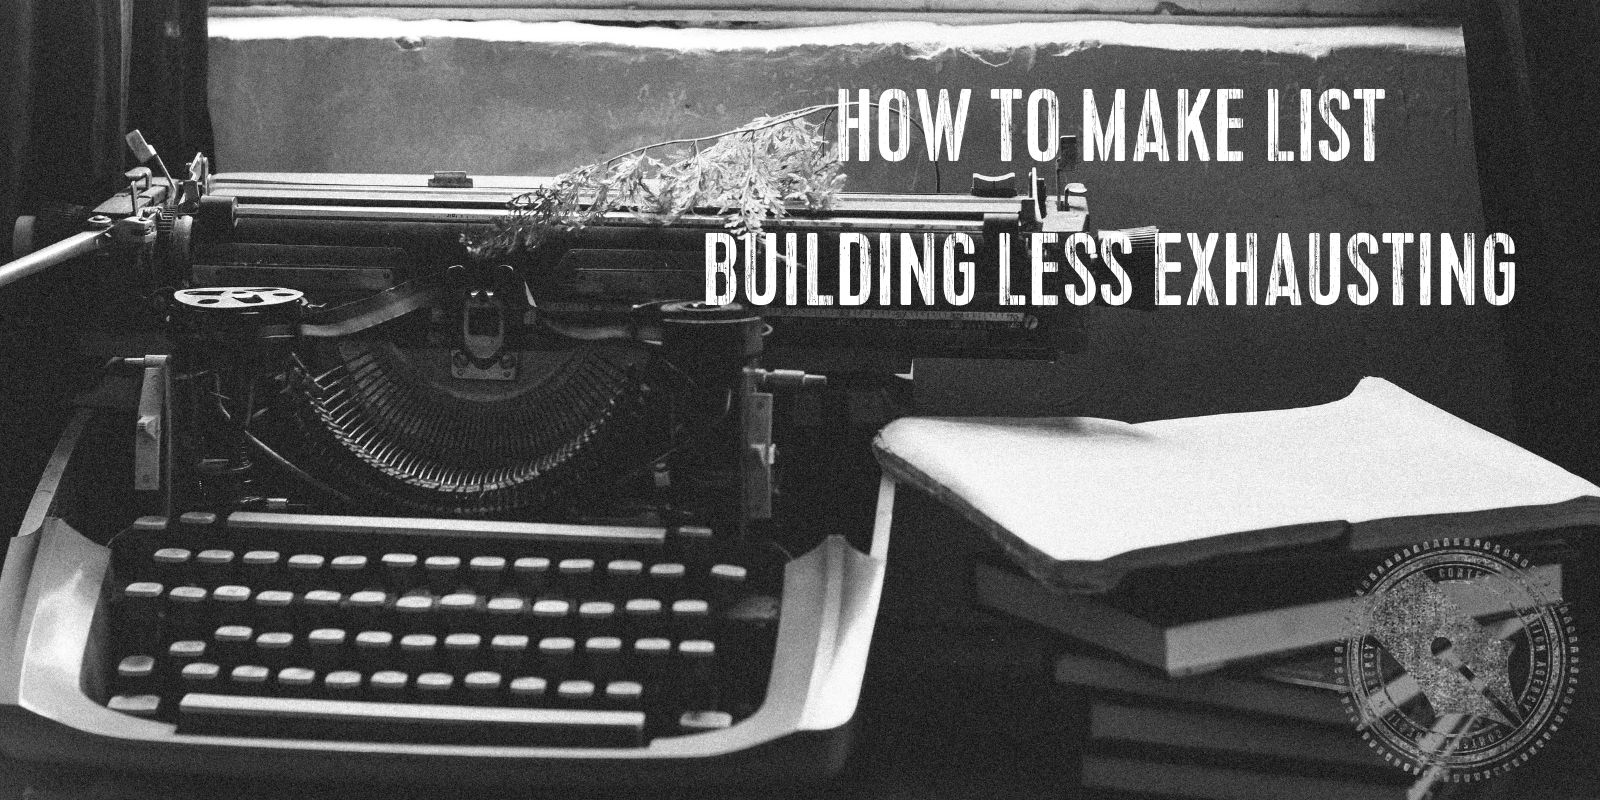 [Image Description] A black and white image of a vintage typewriter on a desk next to a stack of books. On the typewriter is a fern frond. "How to Make List Building Less Exhausting" is superimposed over the image.